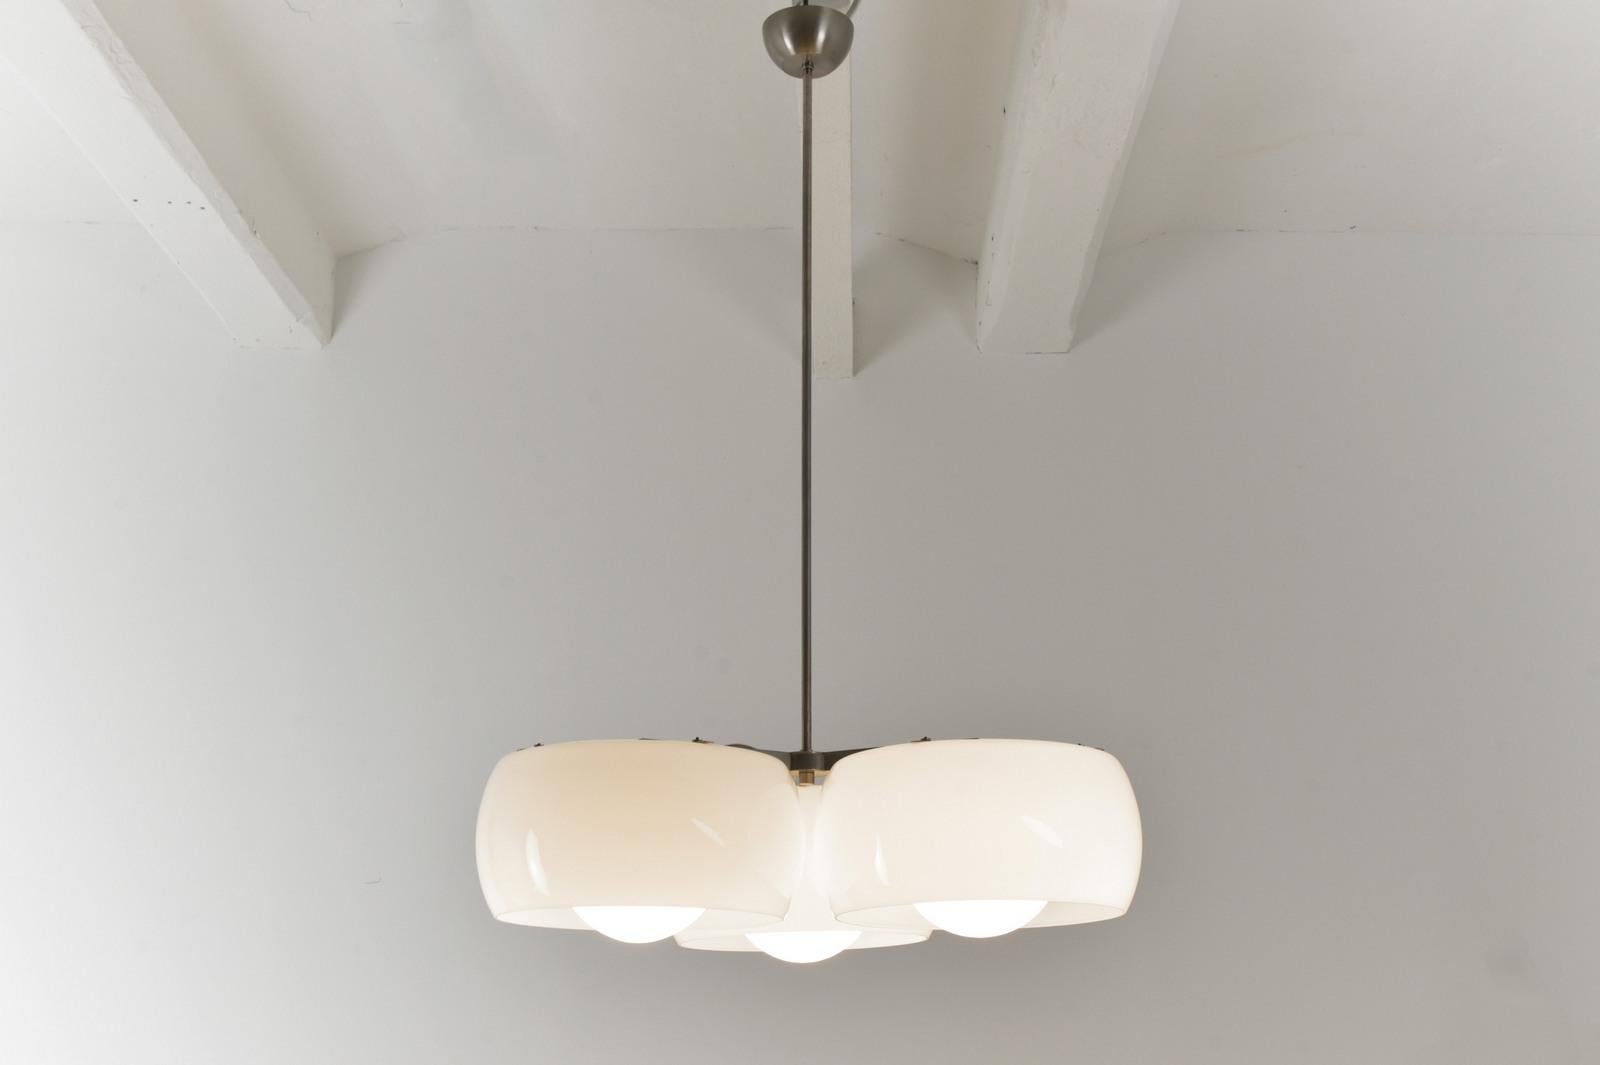 Mid-20th Century Pendant Lamp by Vico Magistretti for Artemide, Italy - 1961 For Sale